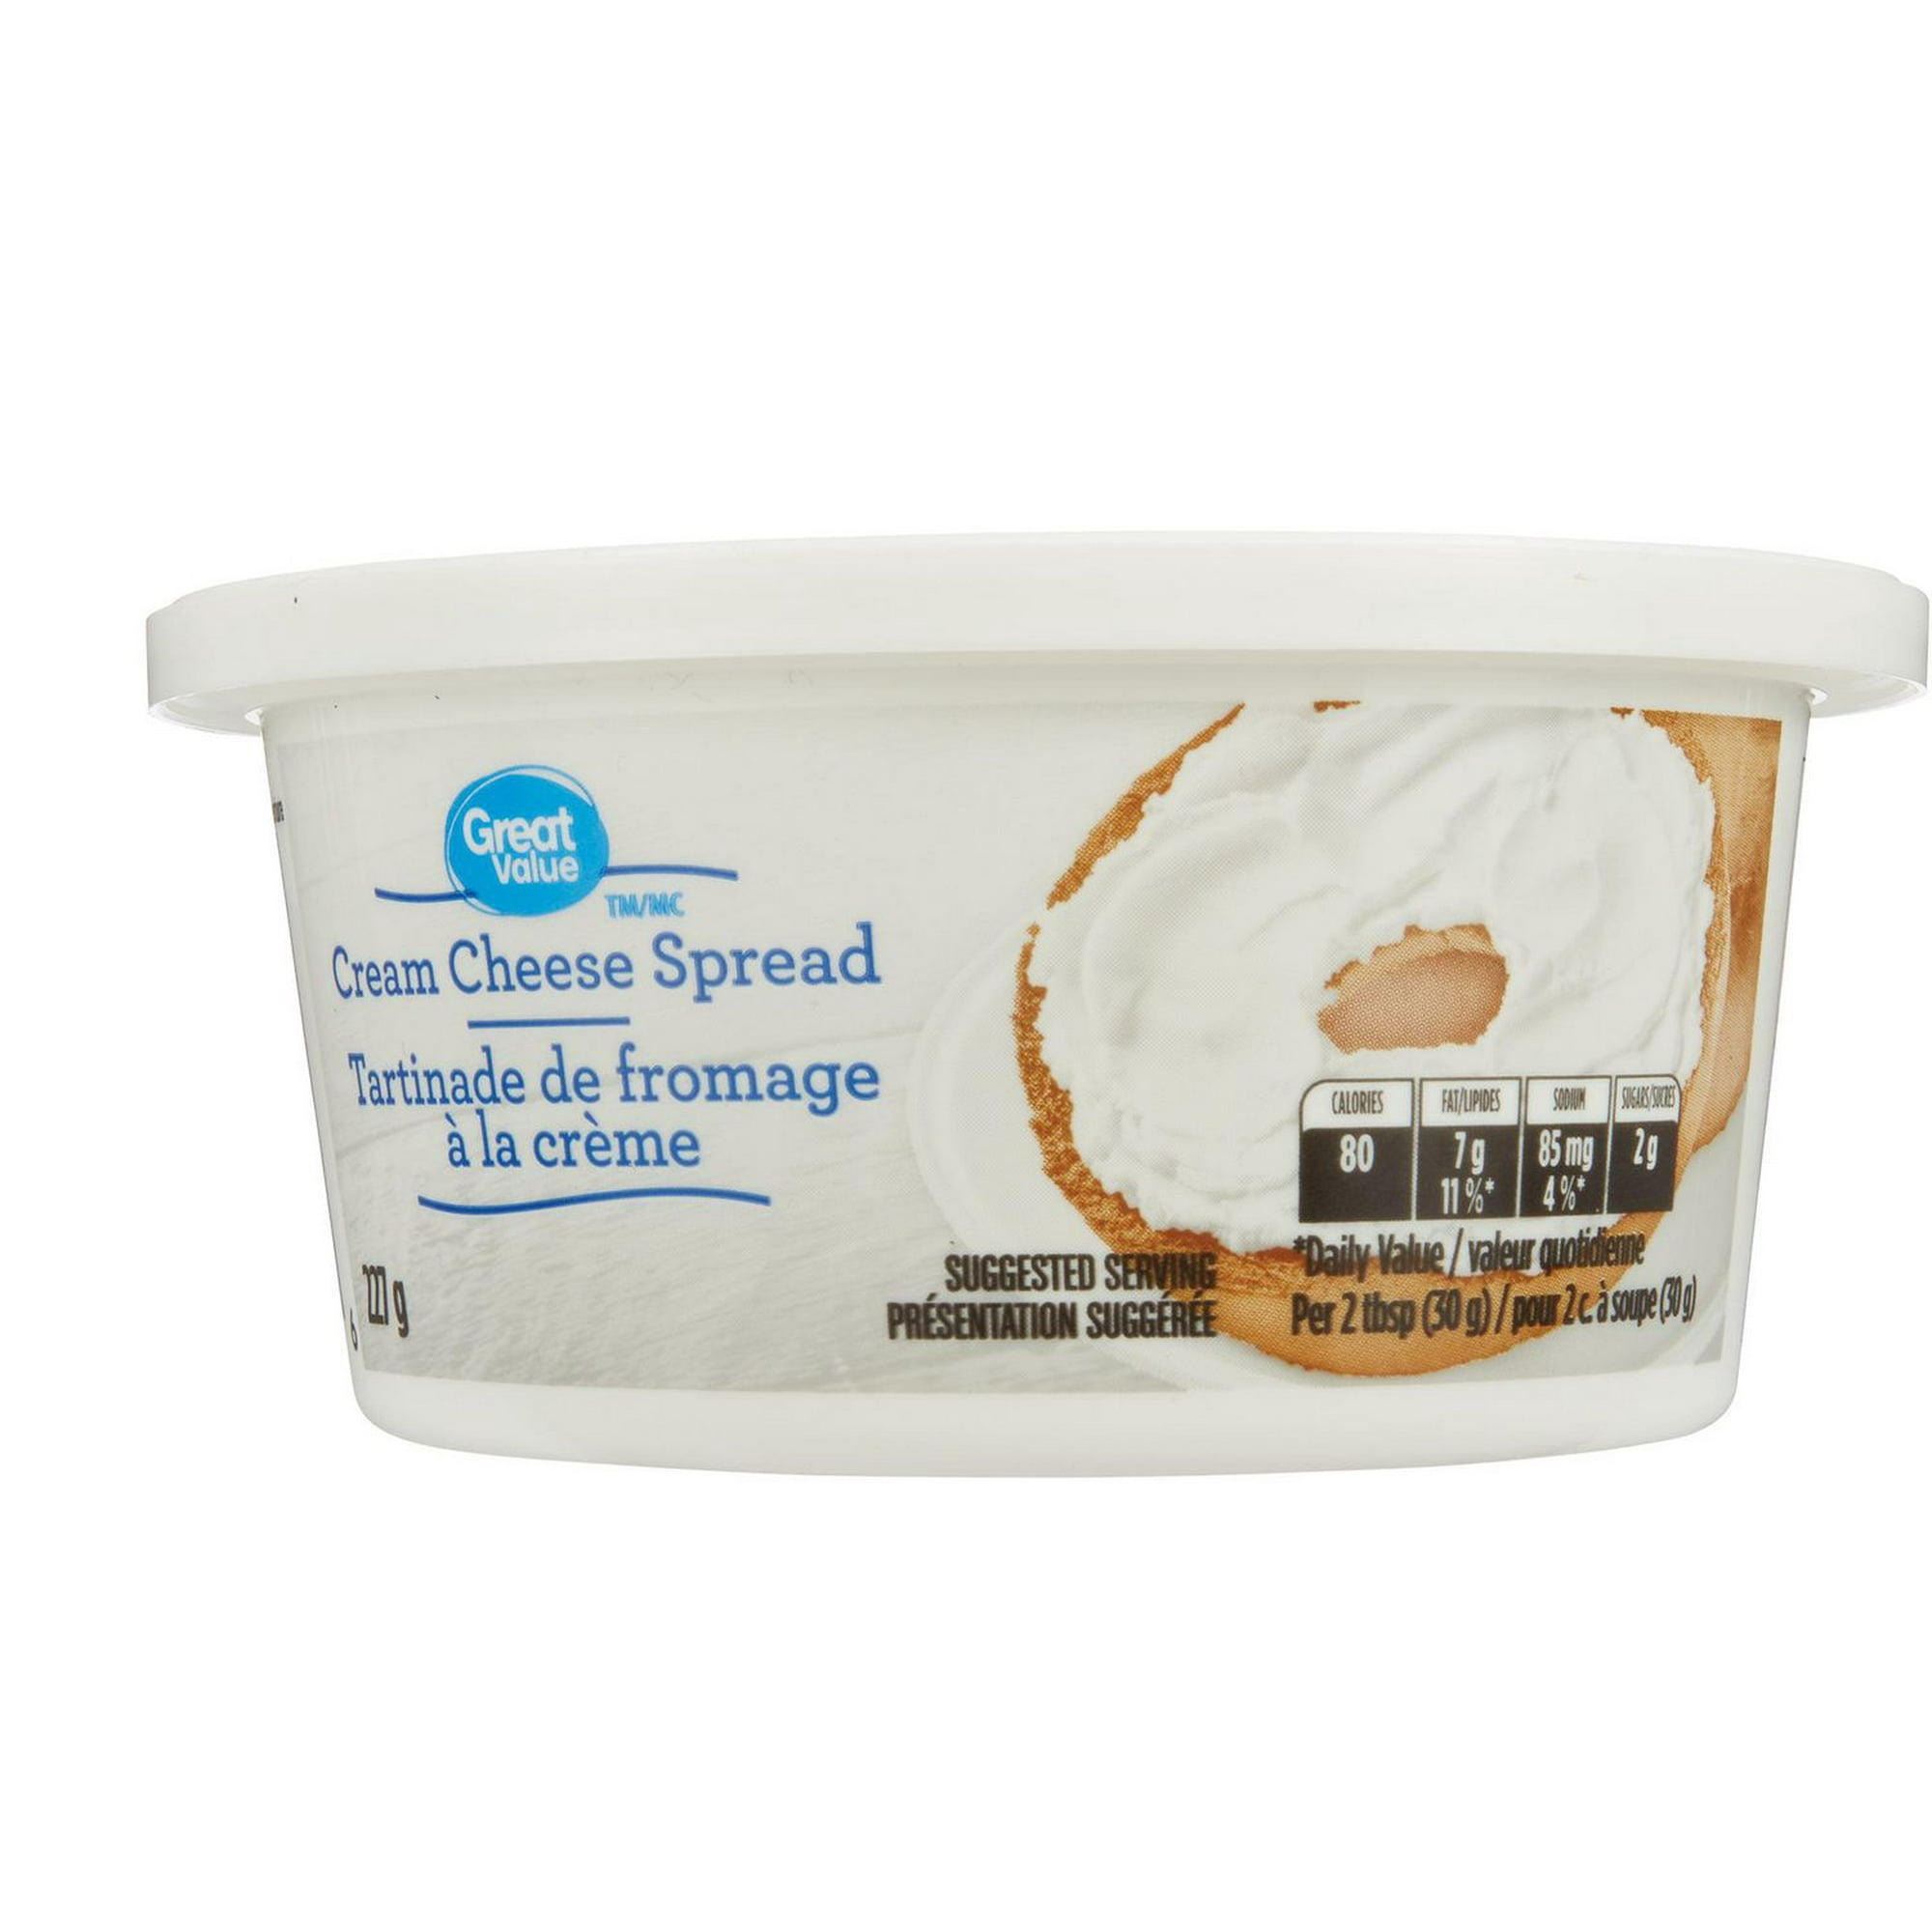 Great Value Cream Cheese 8 oz, 2 Count